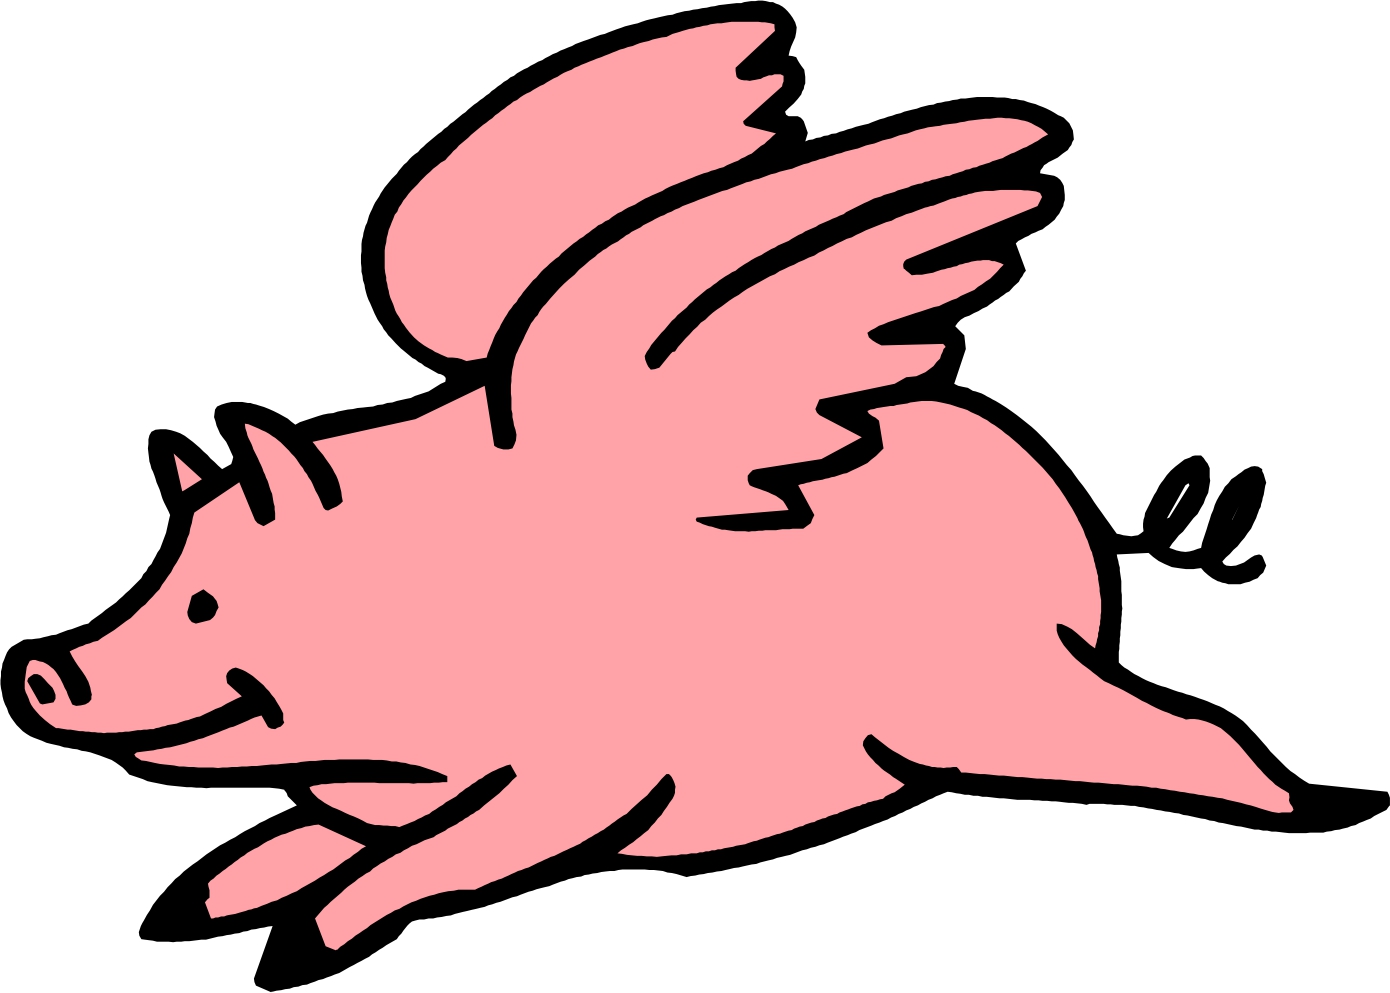 clipart drawing of a pig - photo #42